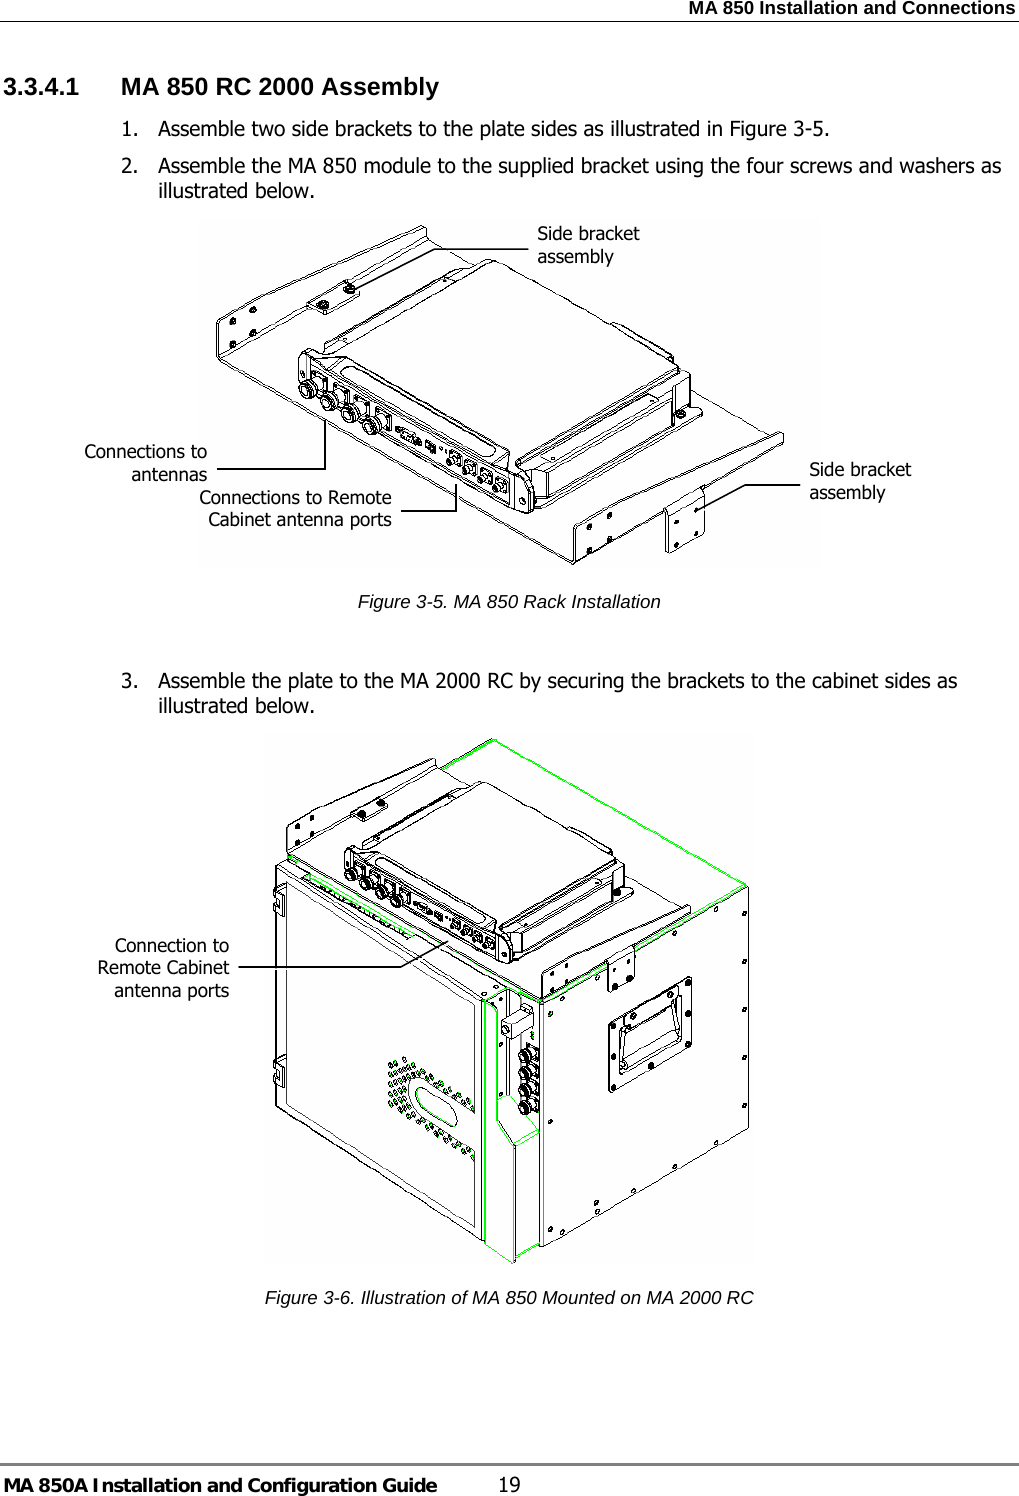 MA 850 Installation and Connections MA 850A Installation and Configuration Guide  19 3.3.4.1  MA 850 RC 2000 Assembly 1. Assemble two side brackets to the plate sides as illustrated in Figure  3-5.  2. Assemble the MA 850 module to the supplied bracket using the four screws and washers as illustrated below.   Figure  3-5. MA 850 Rack Installation  3. Assemble the plate to the MA 2000 RC by securing the brackets to the cabinet sides as illustrated below.   Figure  3-6. Illustration of MA 850 Mounted on MA 2000 RC  Side bracket assembly Connections to Remote Cabinet antenna portsConnections to antennas  Side bracket assembly Connection to Remote Cabinet antenna ports 